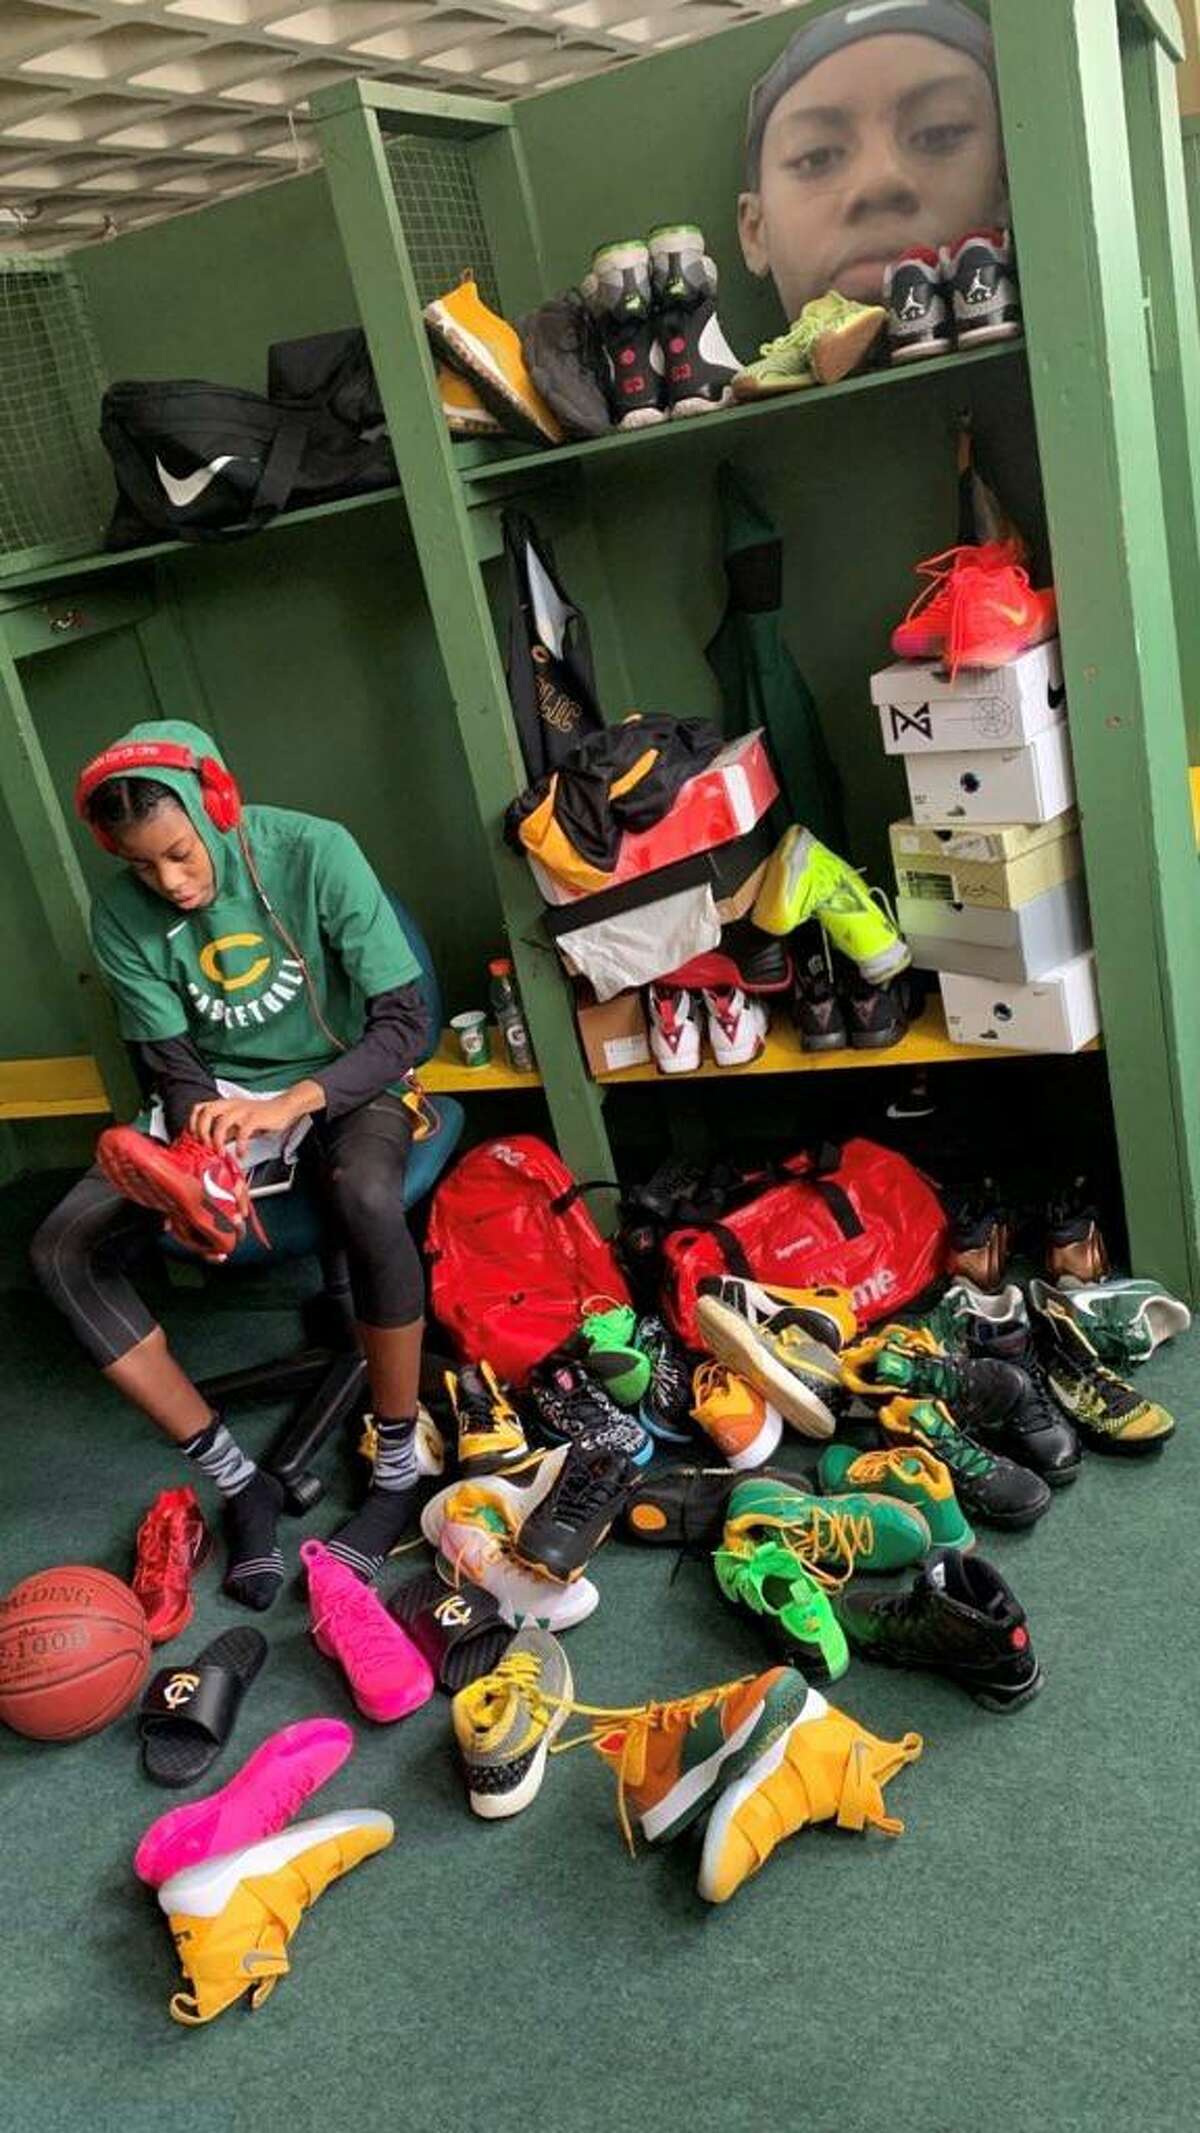 Trinity Catholic star Iyanna Lops at her locker with her sneaker collection.